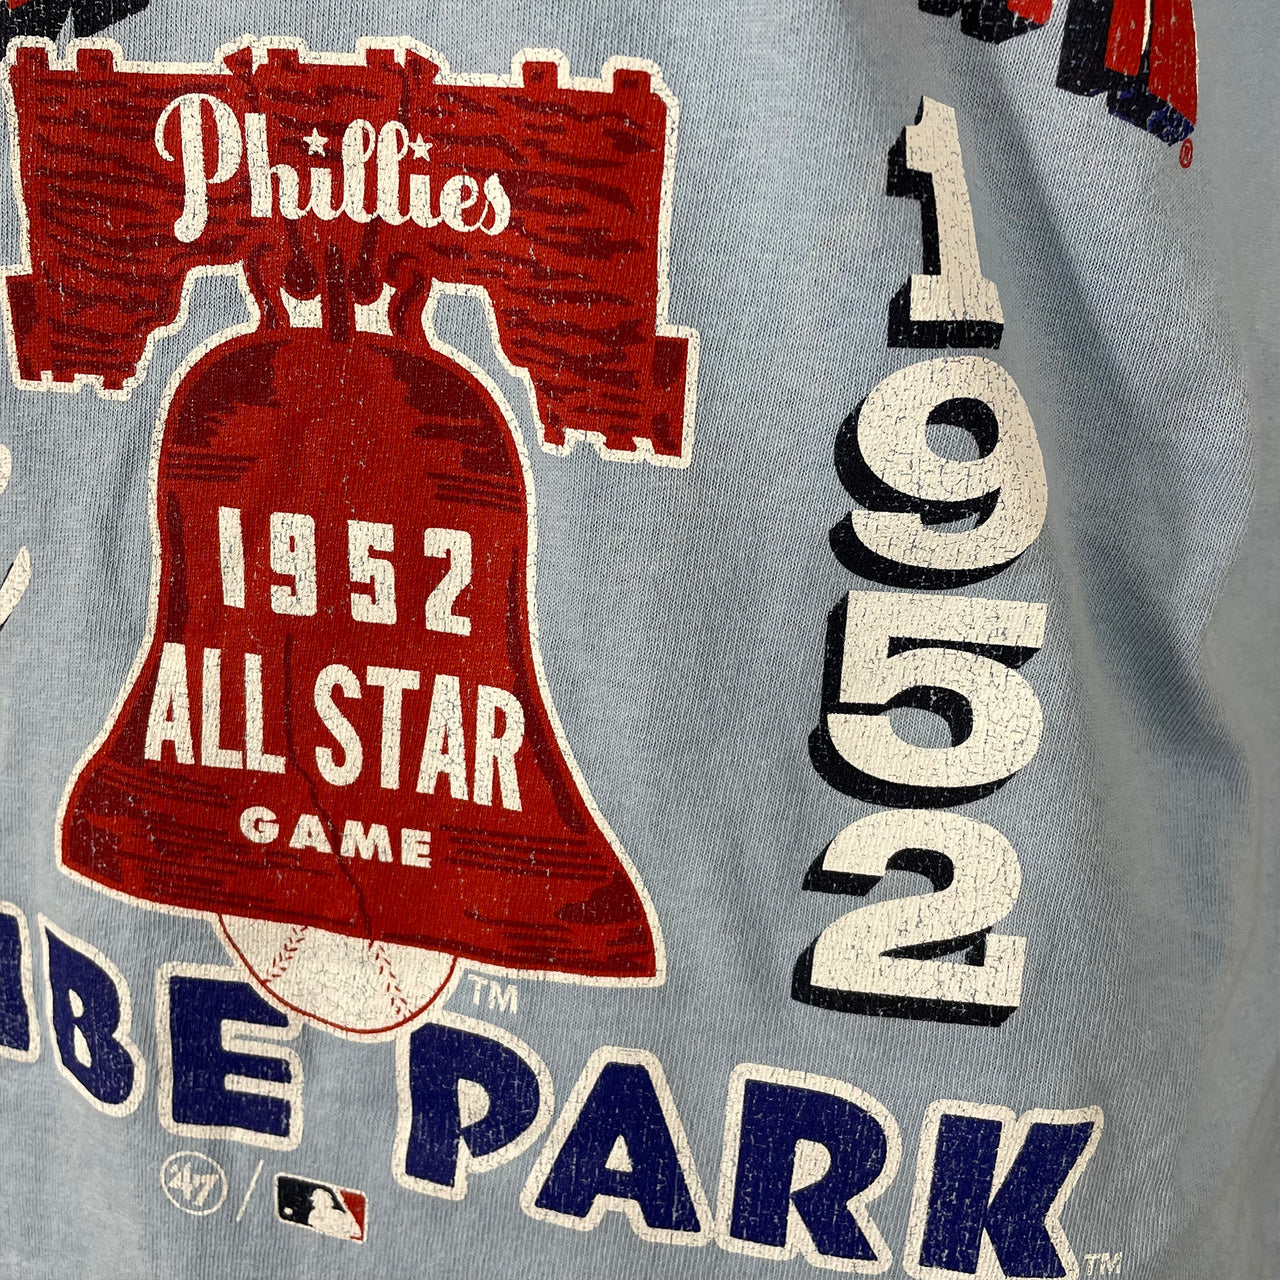 Close up of the 1952 All Star Game patch on the Philadelphia Phillies Distressed Cooperstown 1952 All Star Game Shibe Park Logo Sky Blue Vintage Tubular T-Shirt